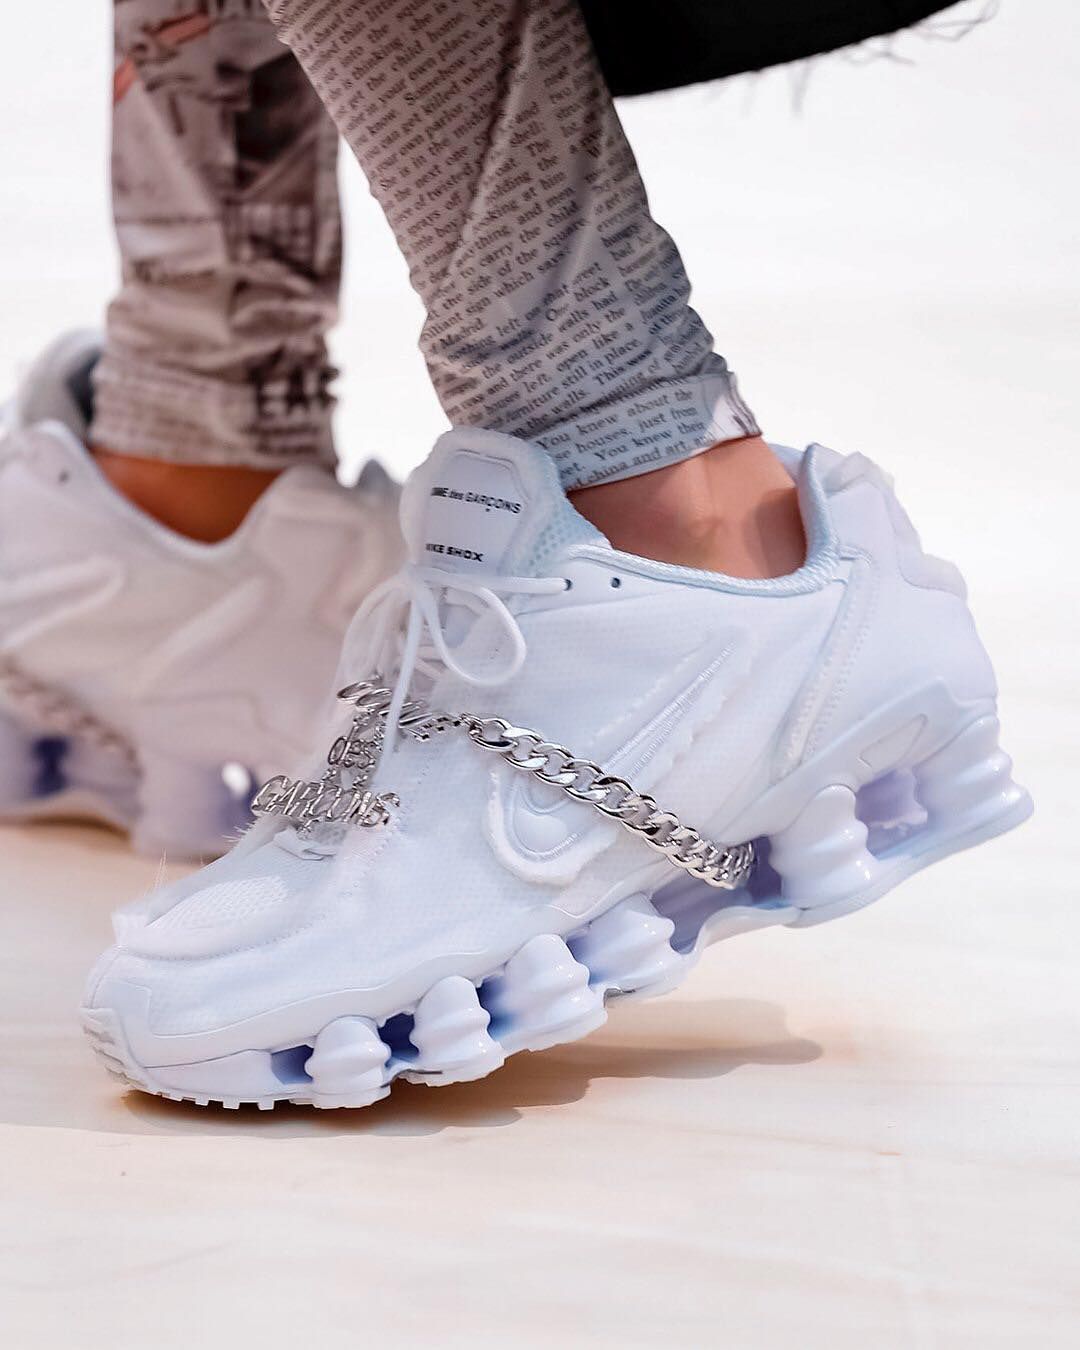 udvikle Disciplin Huddle The Drop Date on Twitter: "COMME DES GARCONS are set to collaborate with  the SWOOSH on the NIKE SHOX as part of the SS19 COLLECTION... What are your  thoughts on CDG's take